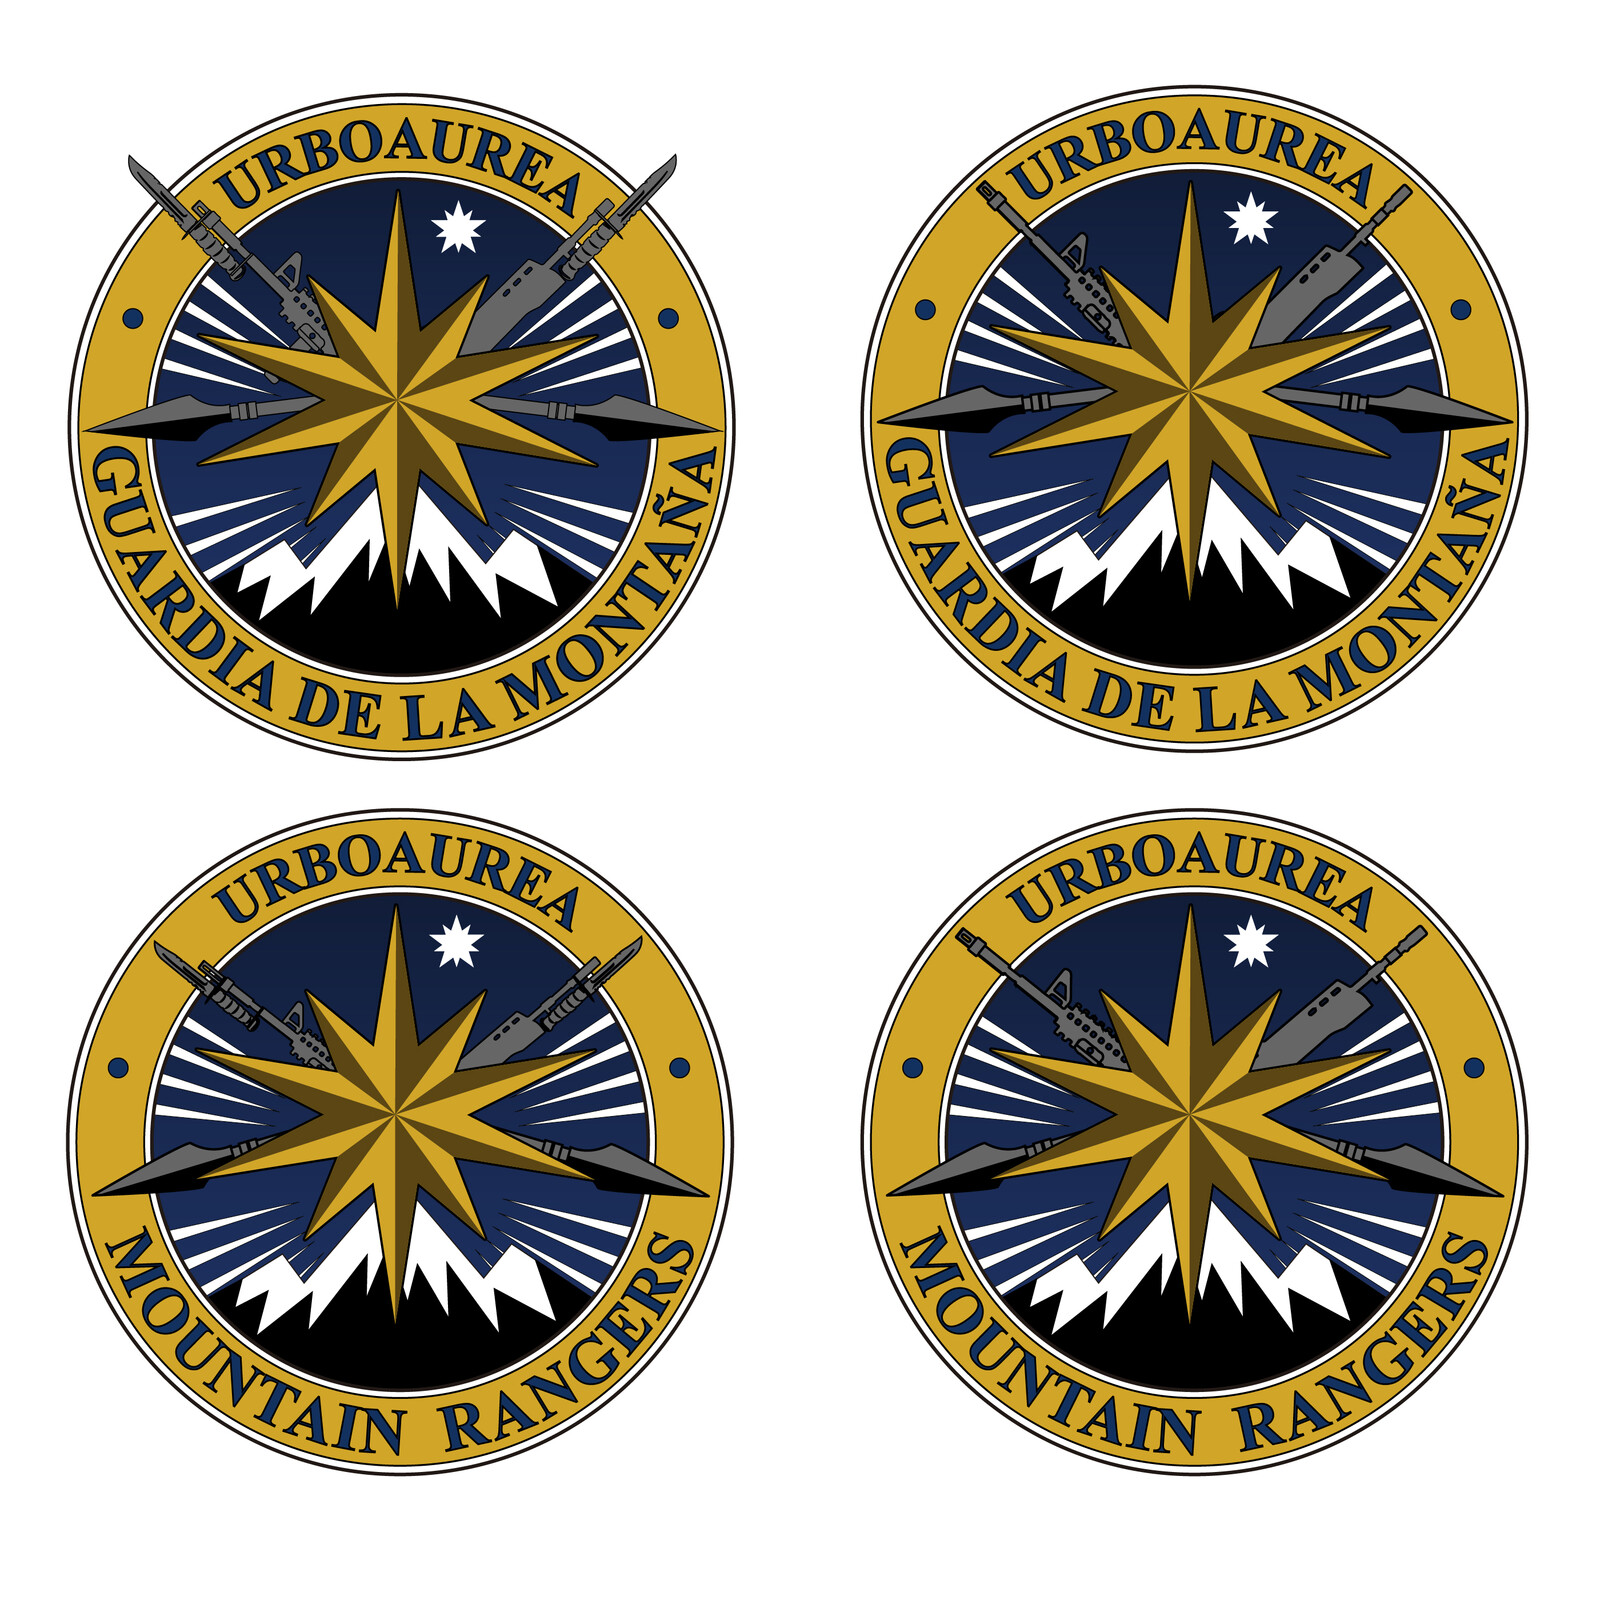 Emblem design for our Mountain Rangers. An elite division of the Imperial Army.